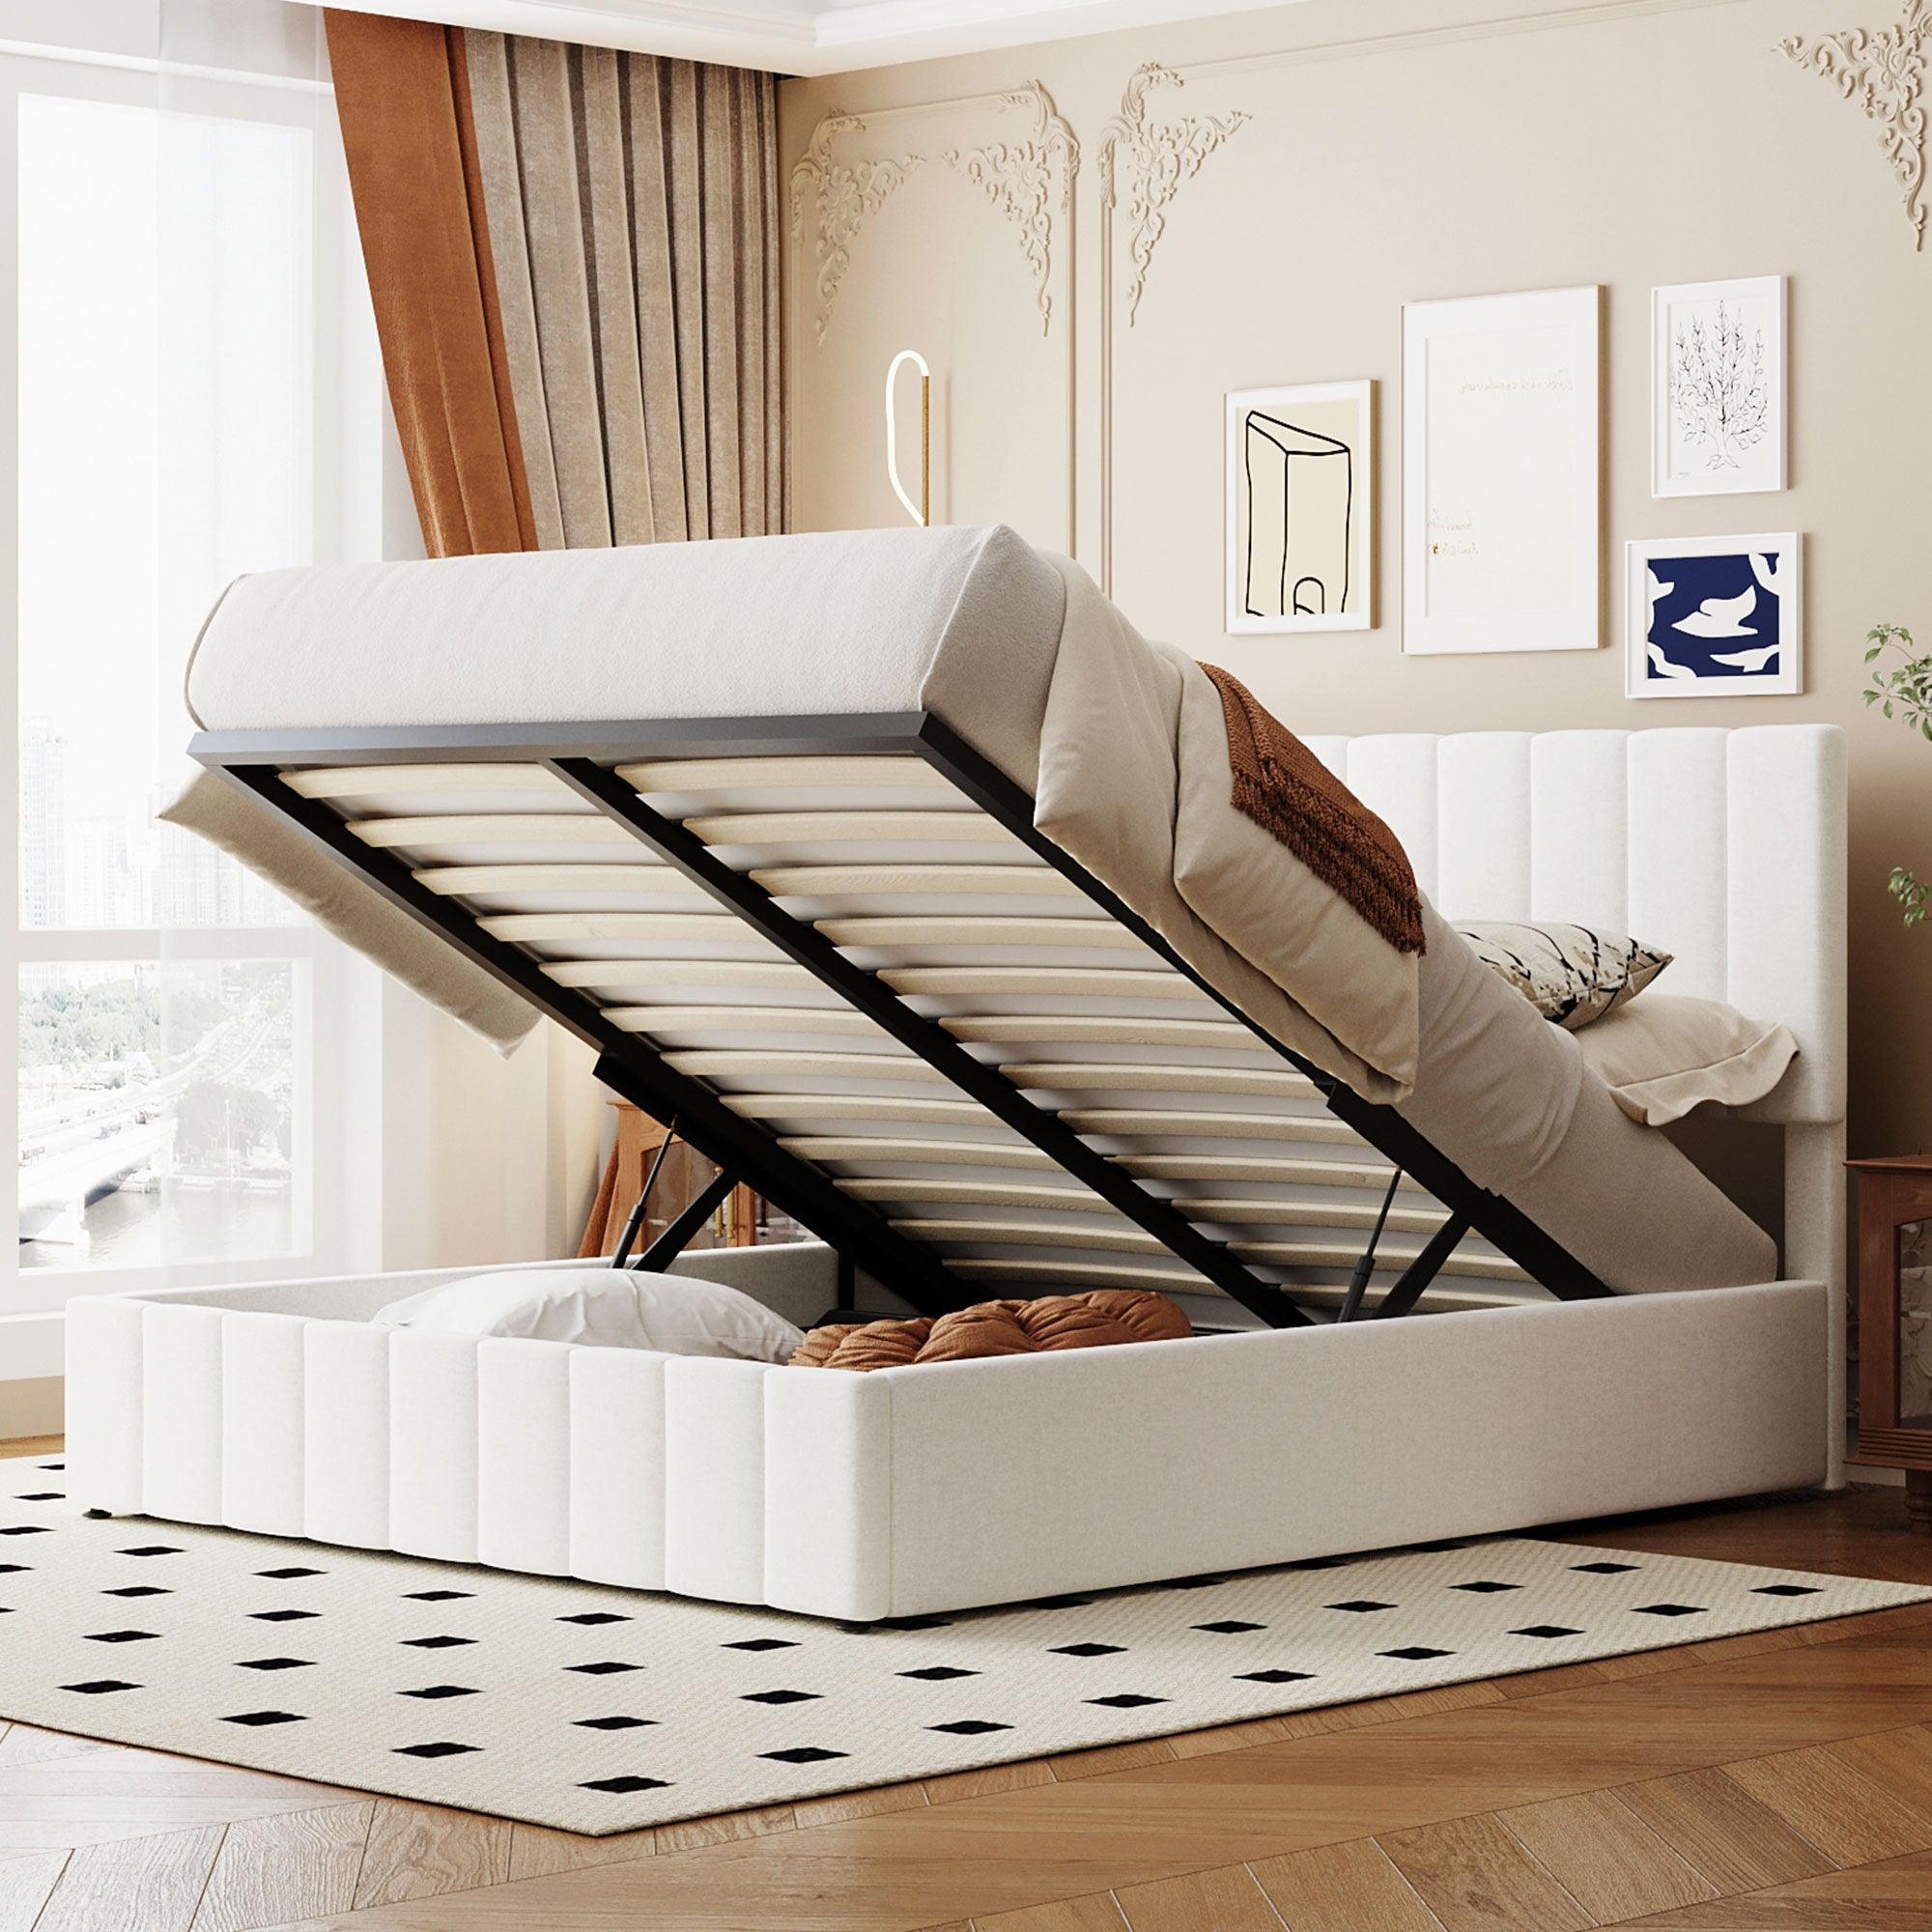 🆓🚛 Queen Size Upholstered Platform Bed With a Hydraulic Storage System - White